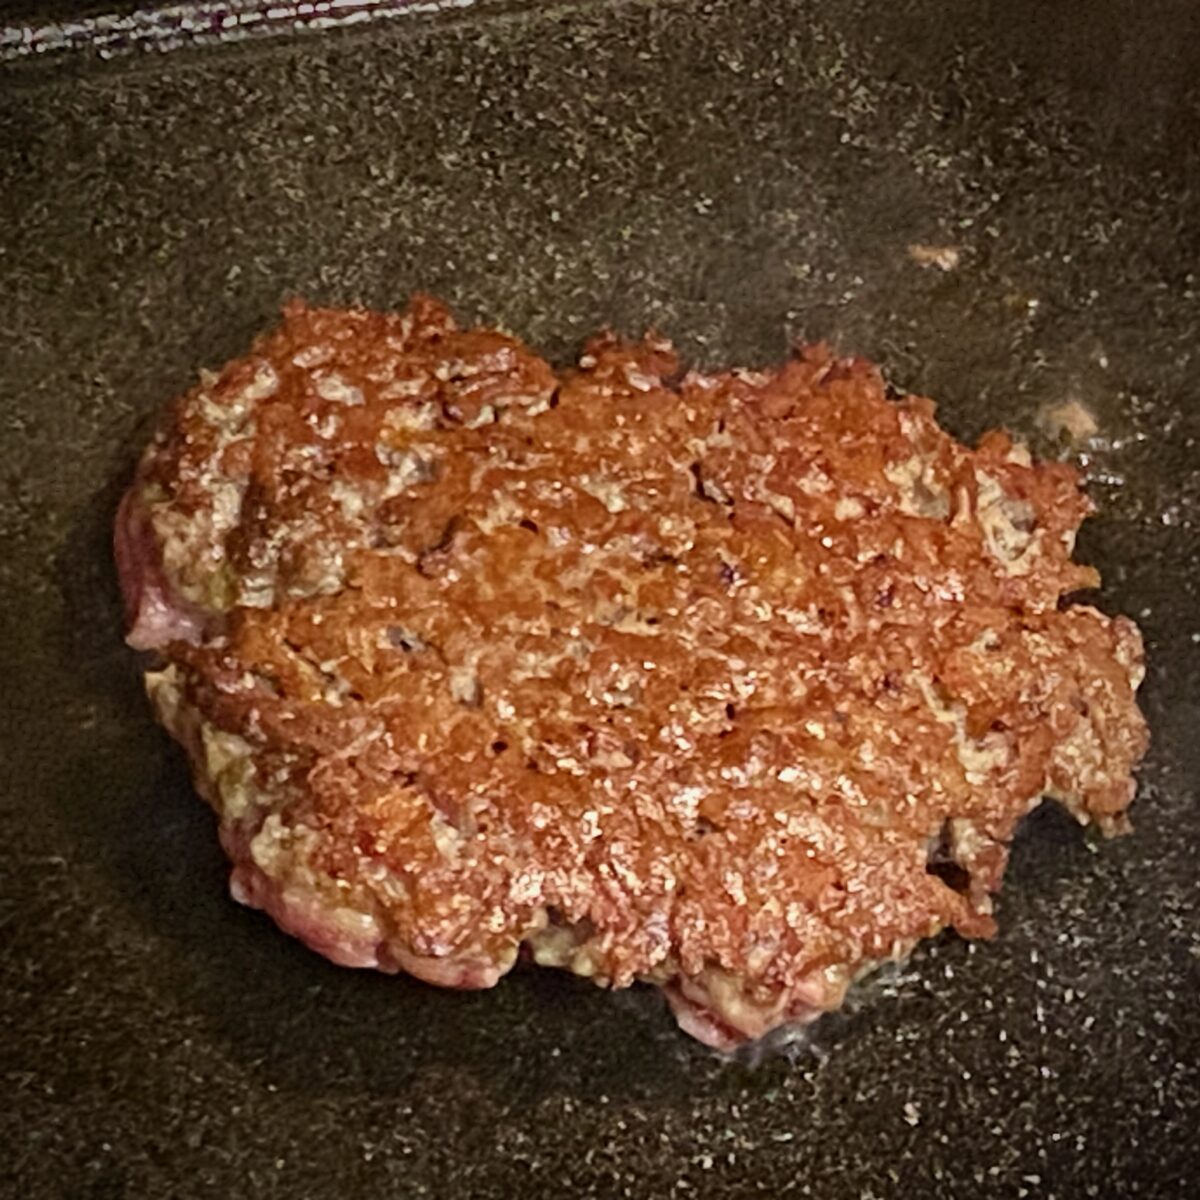 A flipped smash burger patty with a perfect, deep brown sear on one side.